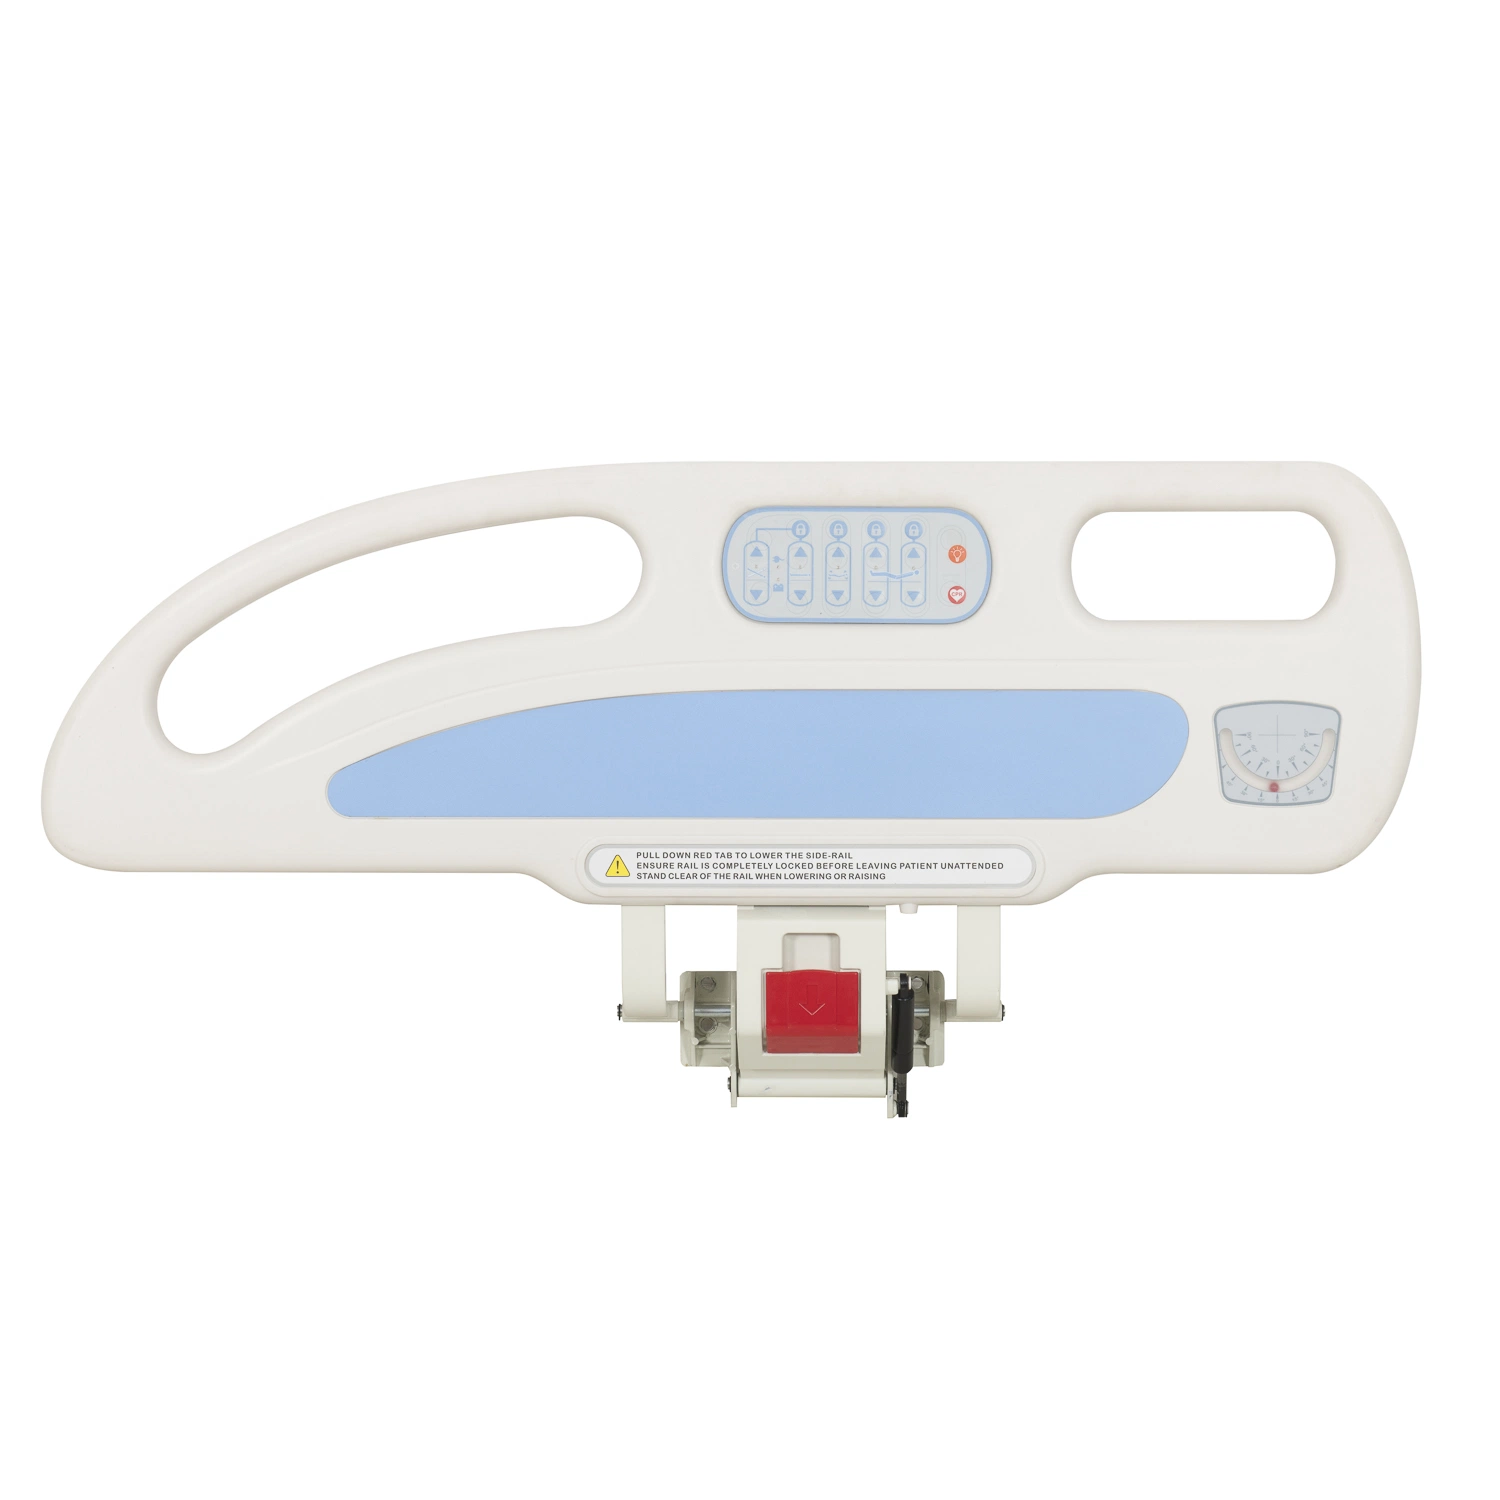 Electrical Hospital Bed Control Panel